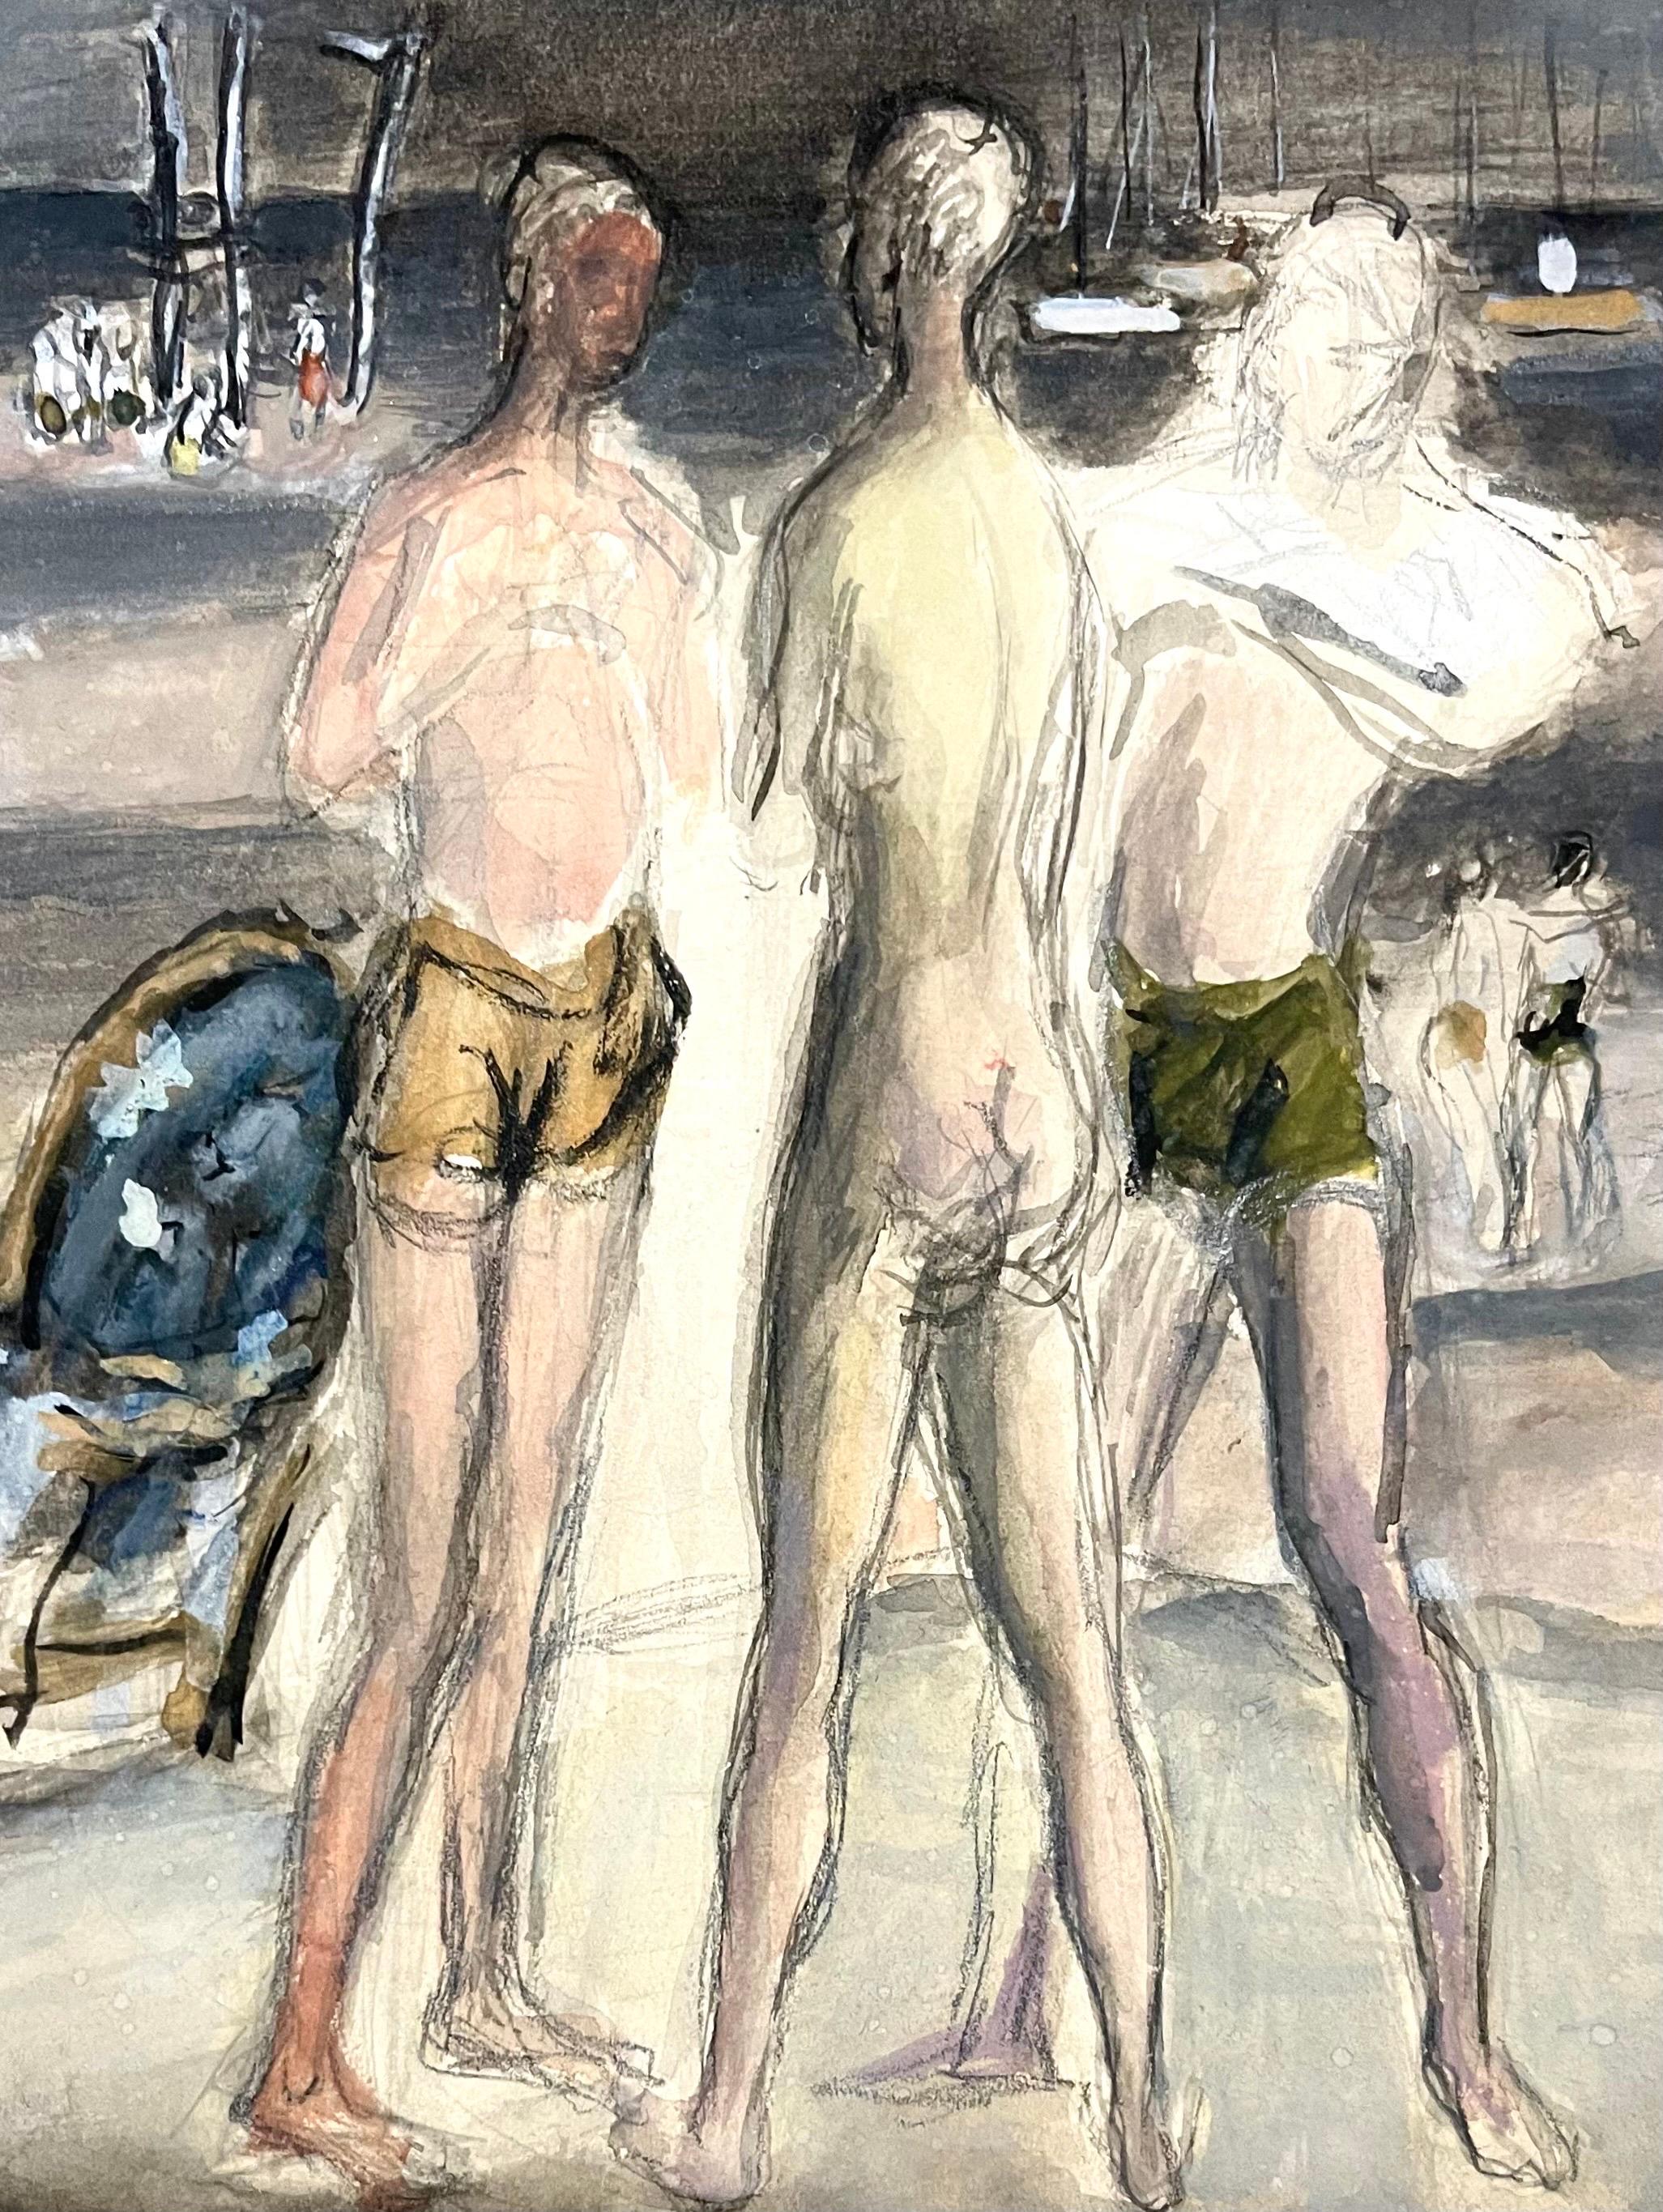 Simka Simkhovitch (Russian/American 1893 - 1949) 
This came with a small grouping from the artist's family, some were hand signed some were not.
These were studies for larger paintings.
This is a watercolor and gouache beach scene three young men